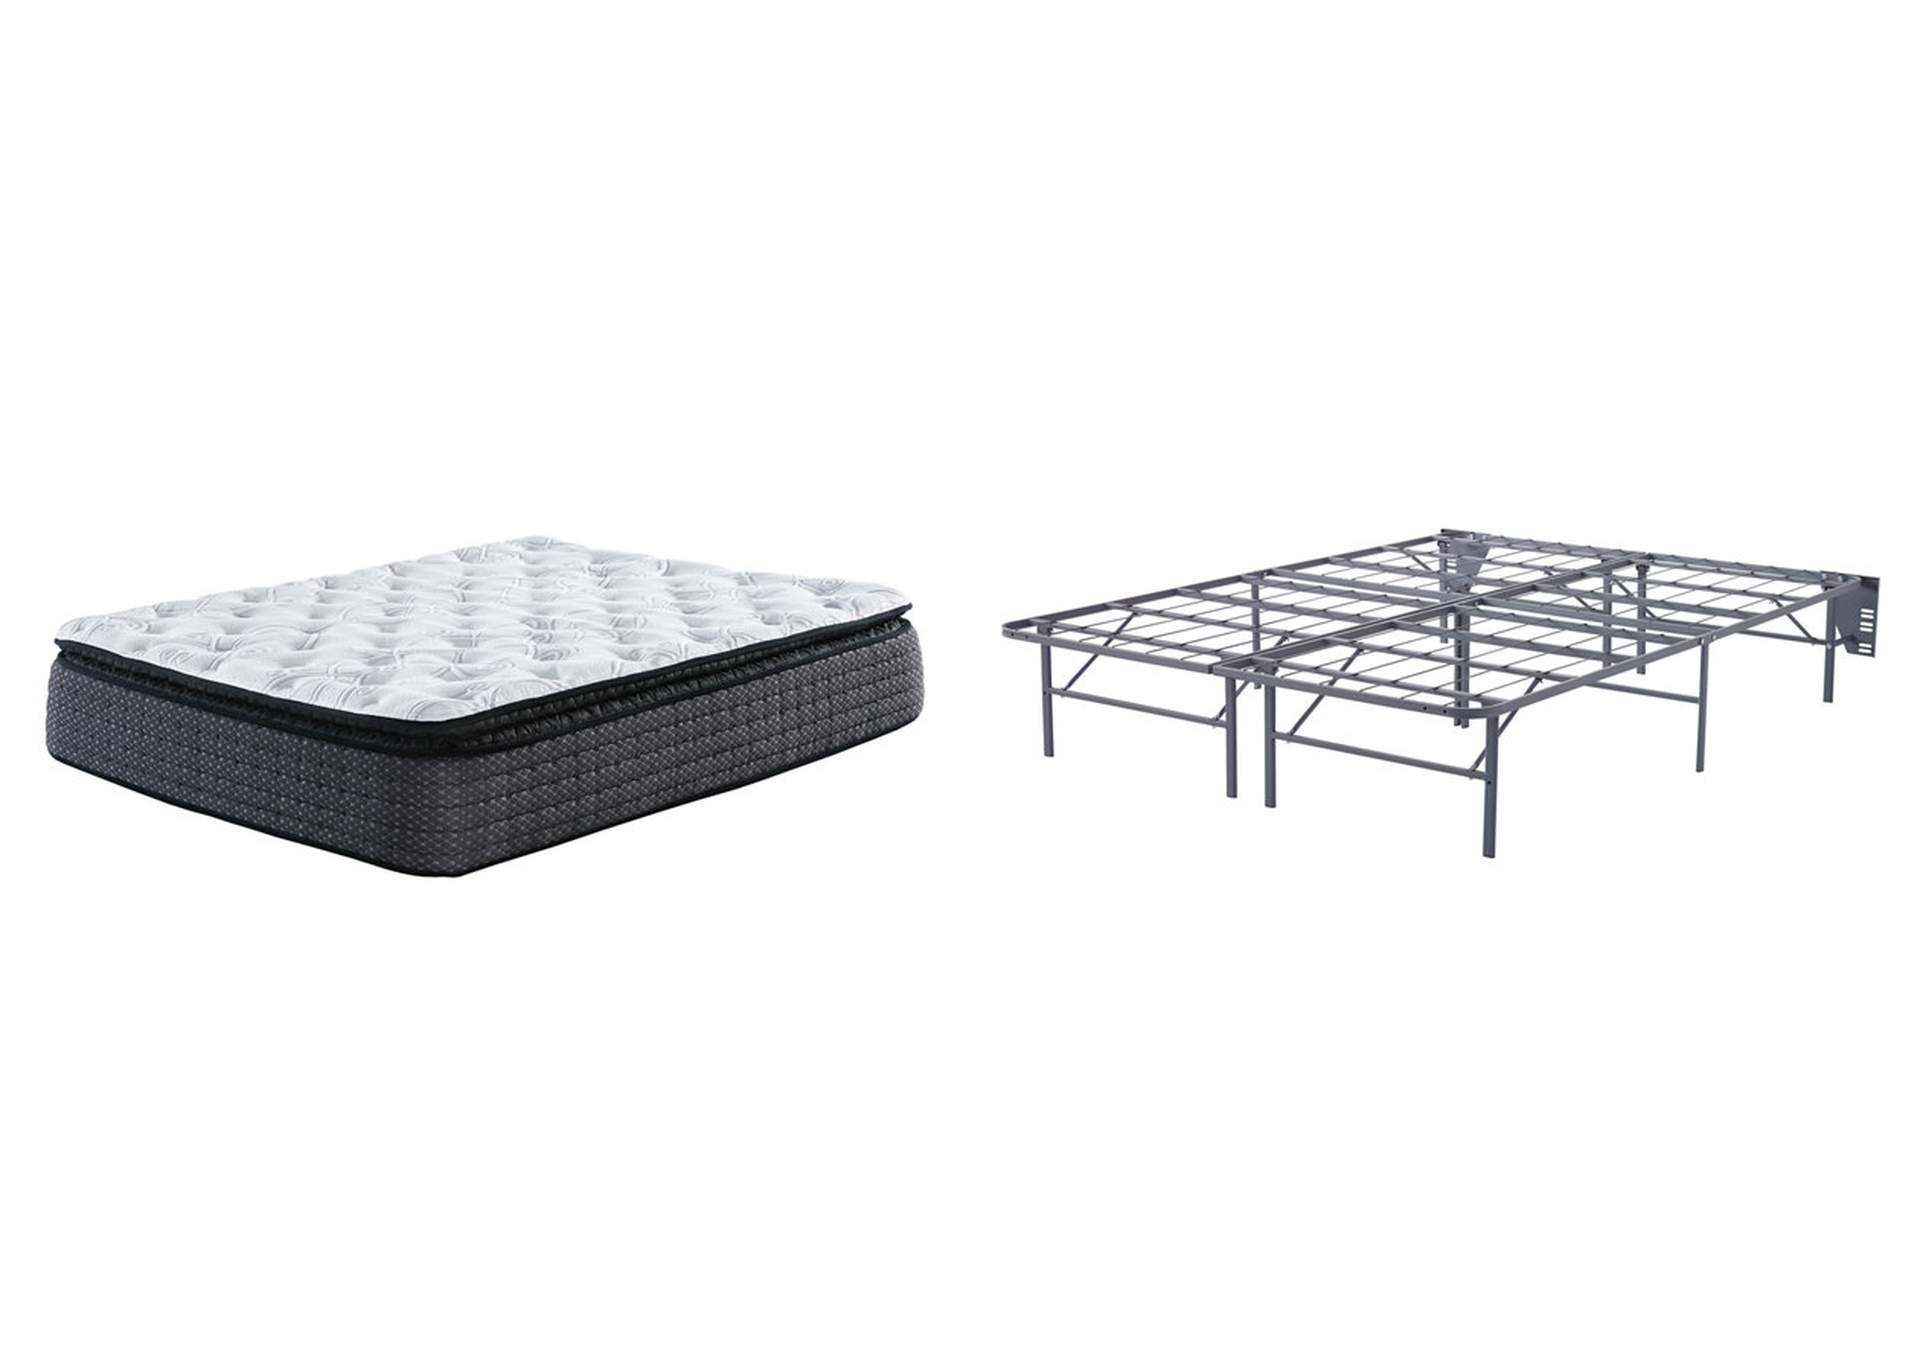 Limited Edition Pillowtop Mattress with Foundation,Sierra Sleep by Ashley